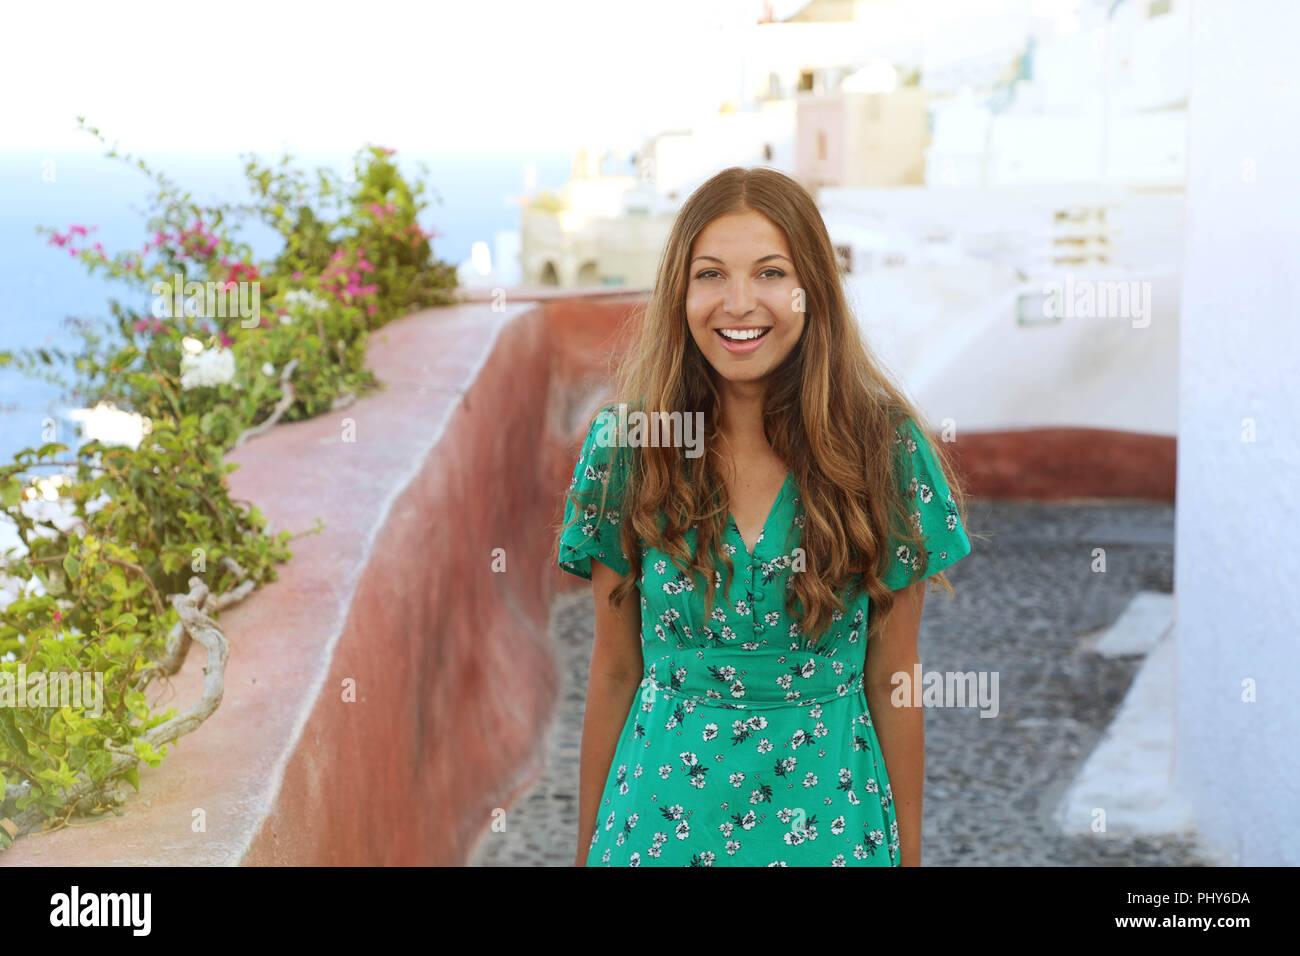 Santorini travel tourist woman visiting famous white village of Oia. Smiling tanned girl in green dress climbs the stairs in Santorini, Cyclades, Gree Stock Photo